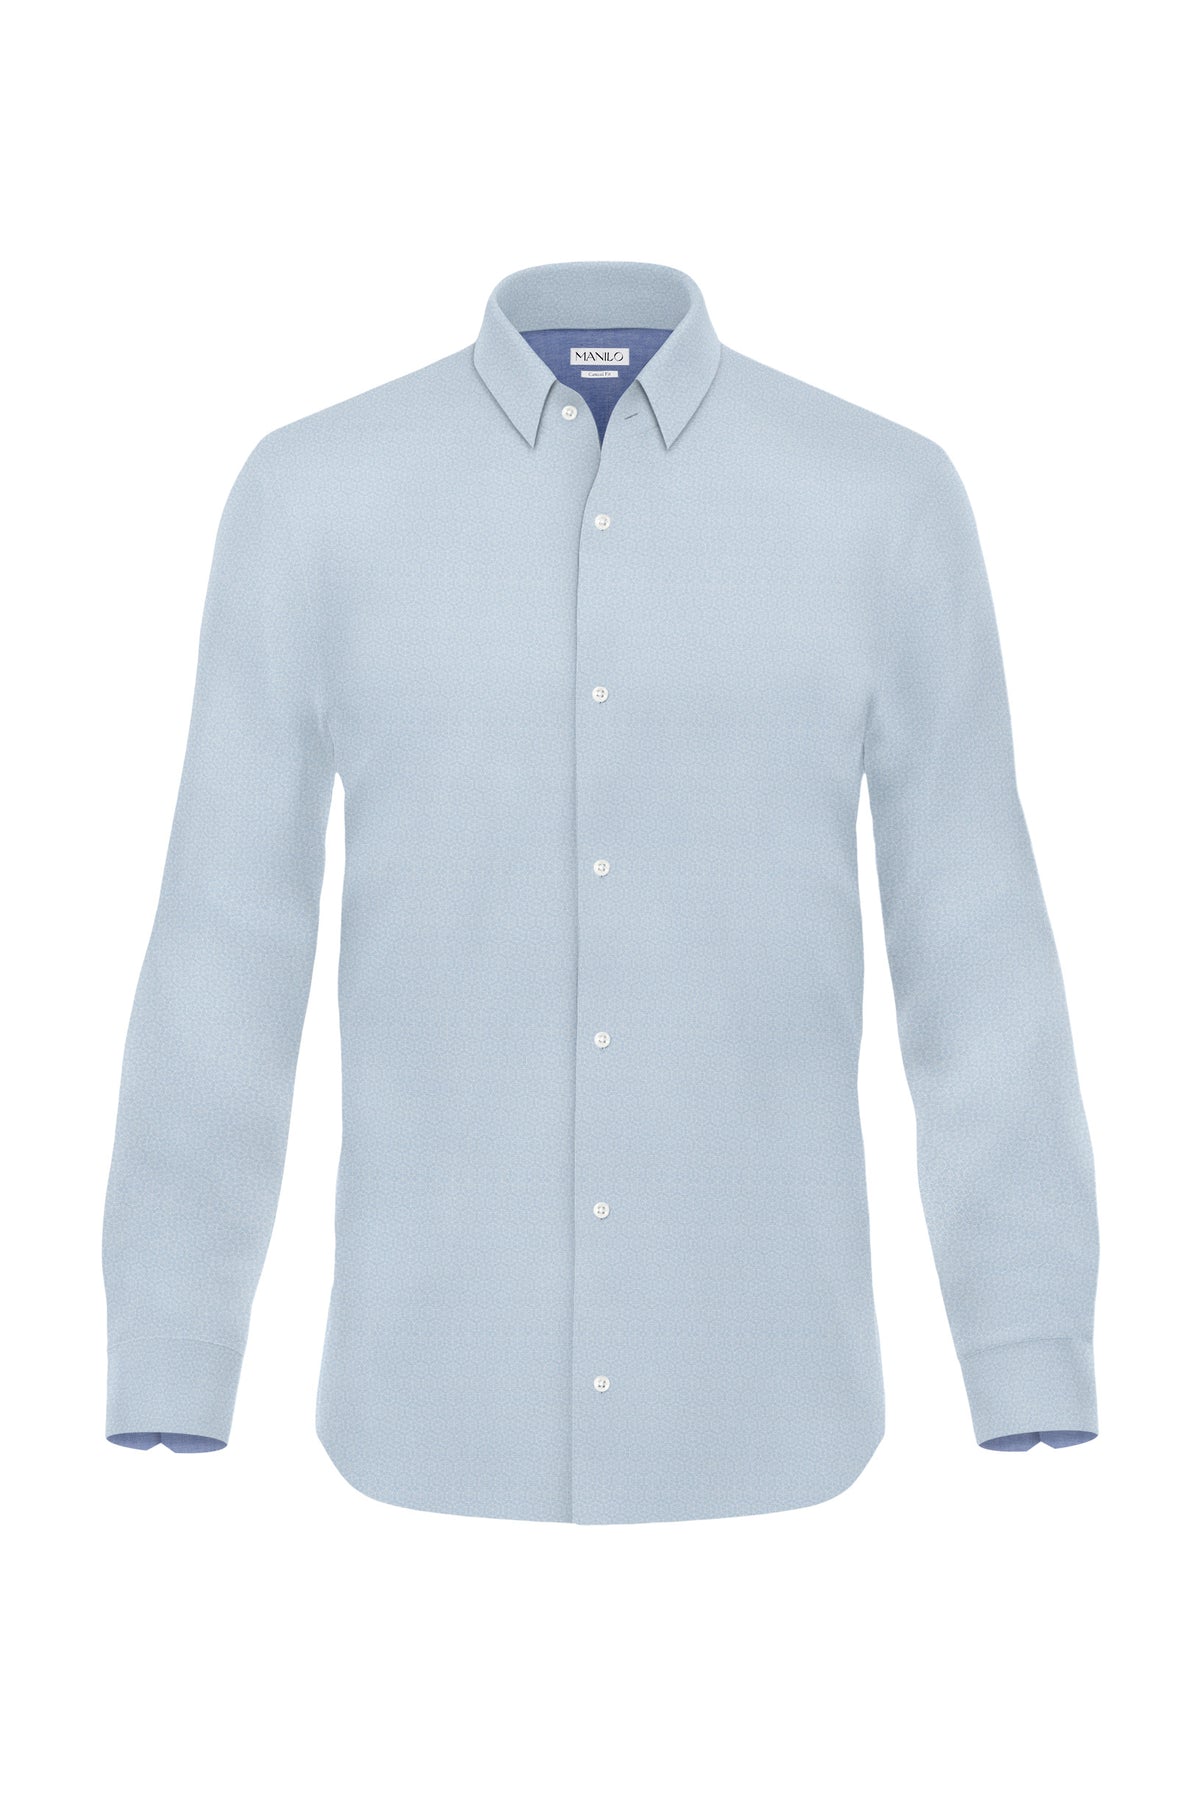 Casual shirt with graphic pattern in light blue (Art. 2239-C)